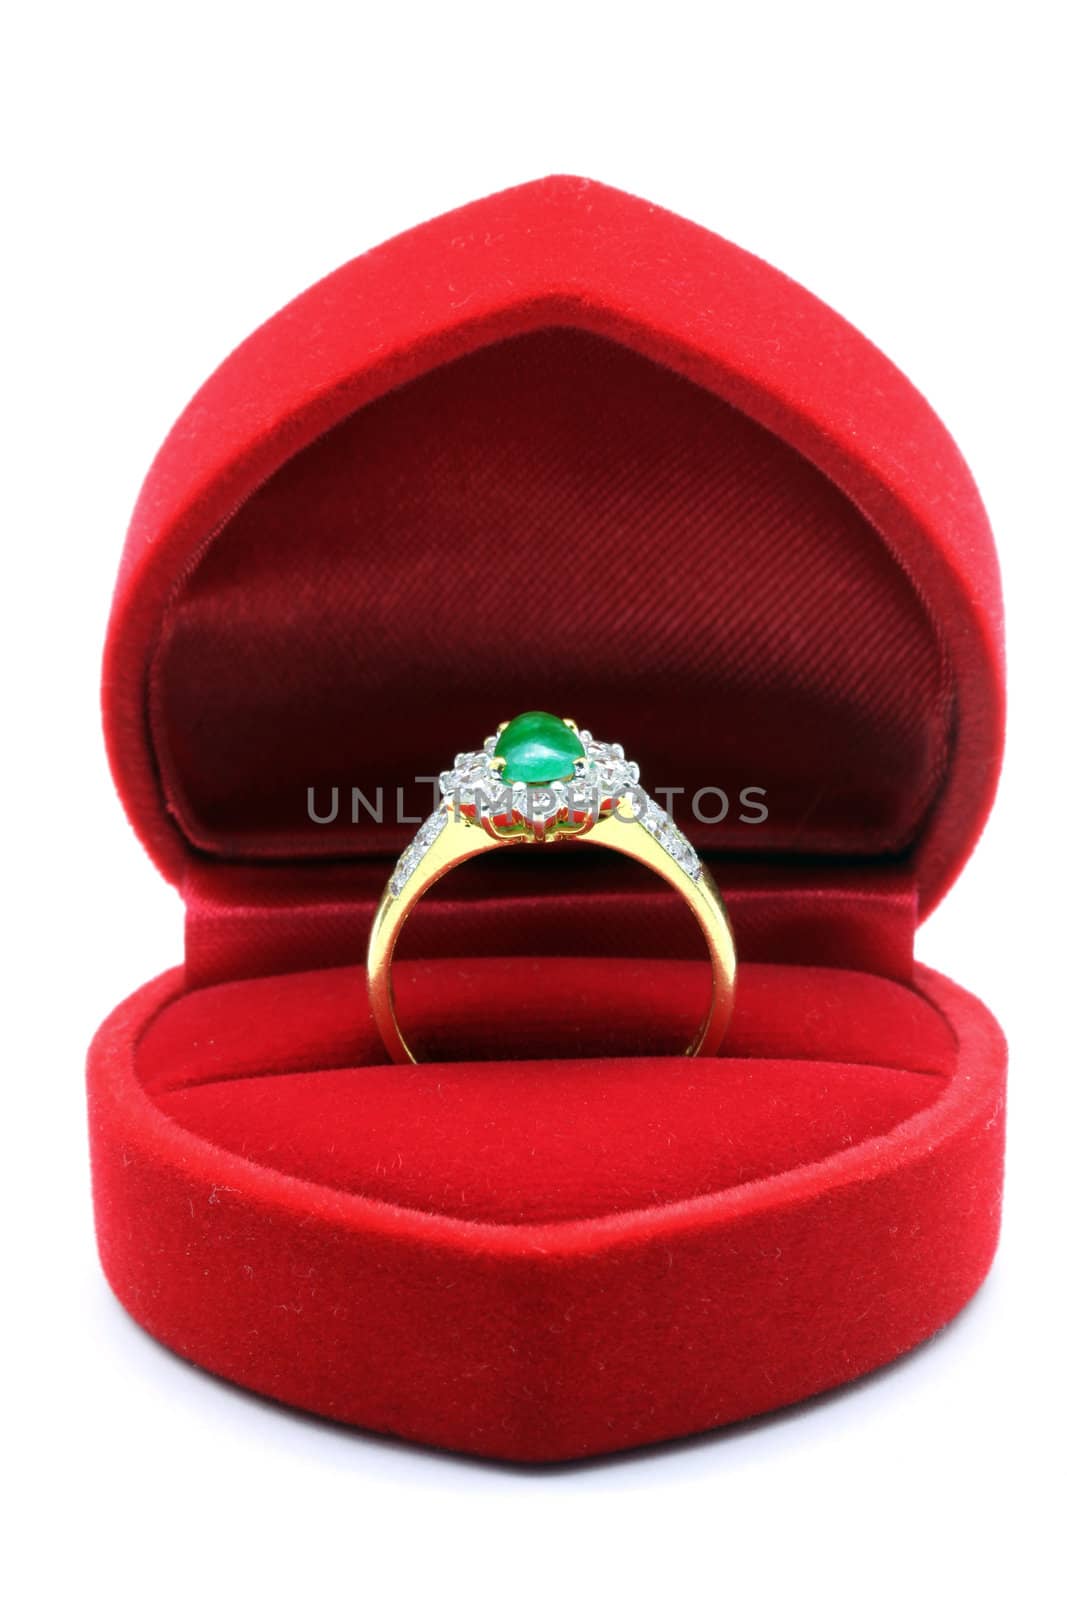 Luxury Diamond Jade Wedding Ring in Red Velvet Silk Box using for Engagement for Love in Valentine Holiday Concept